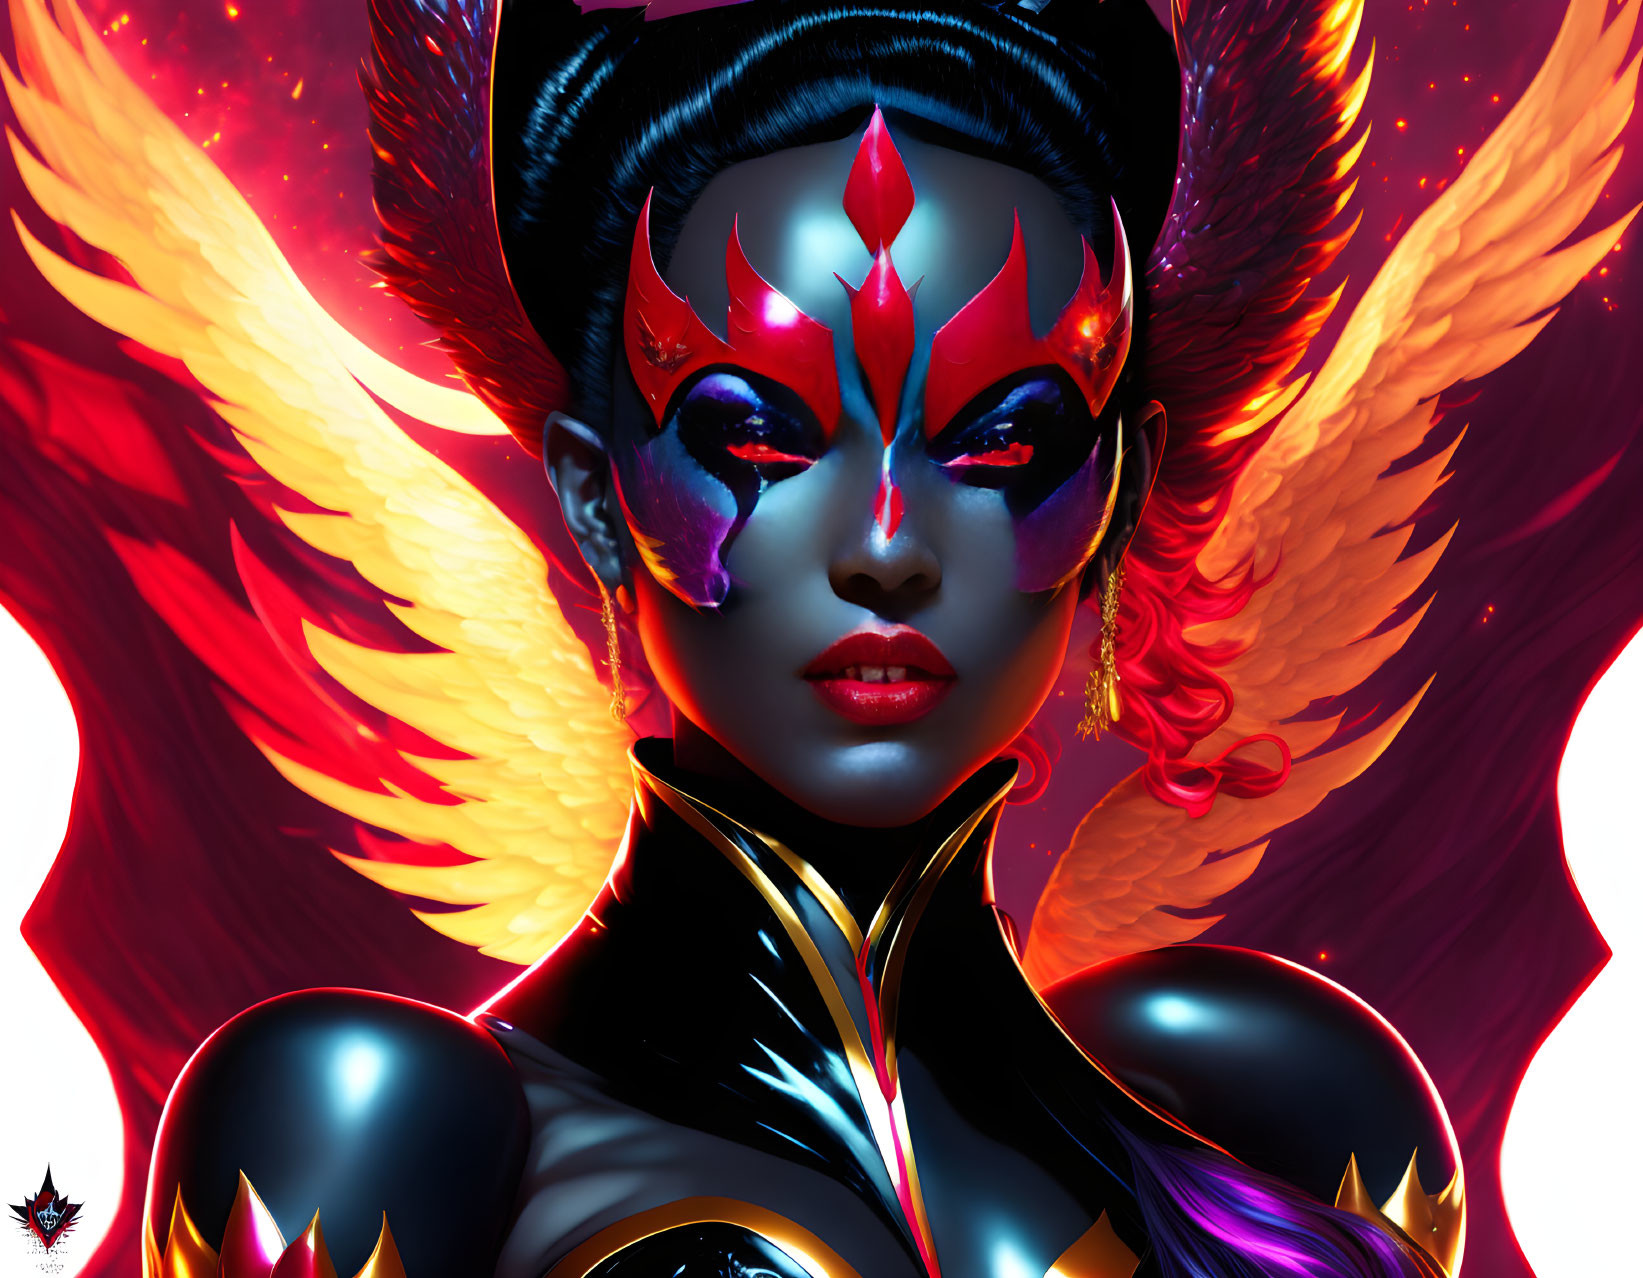 Ms. Sinister: Avatar of the Phoenix